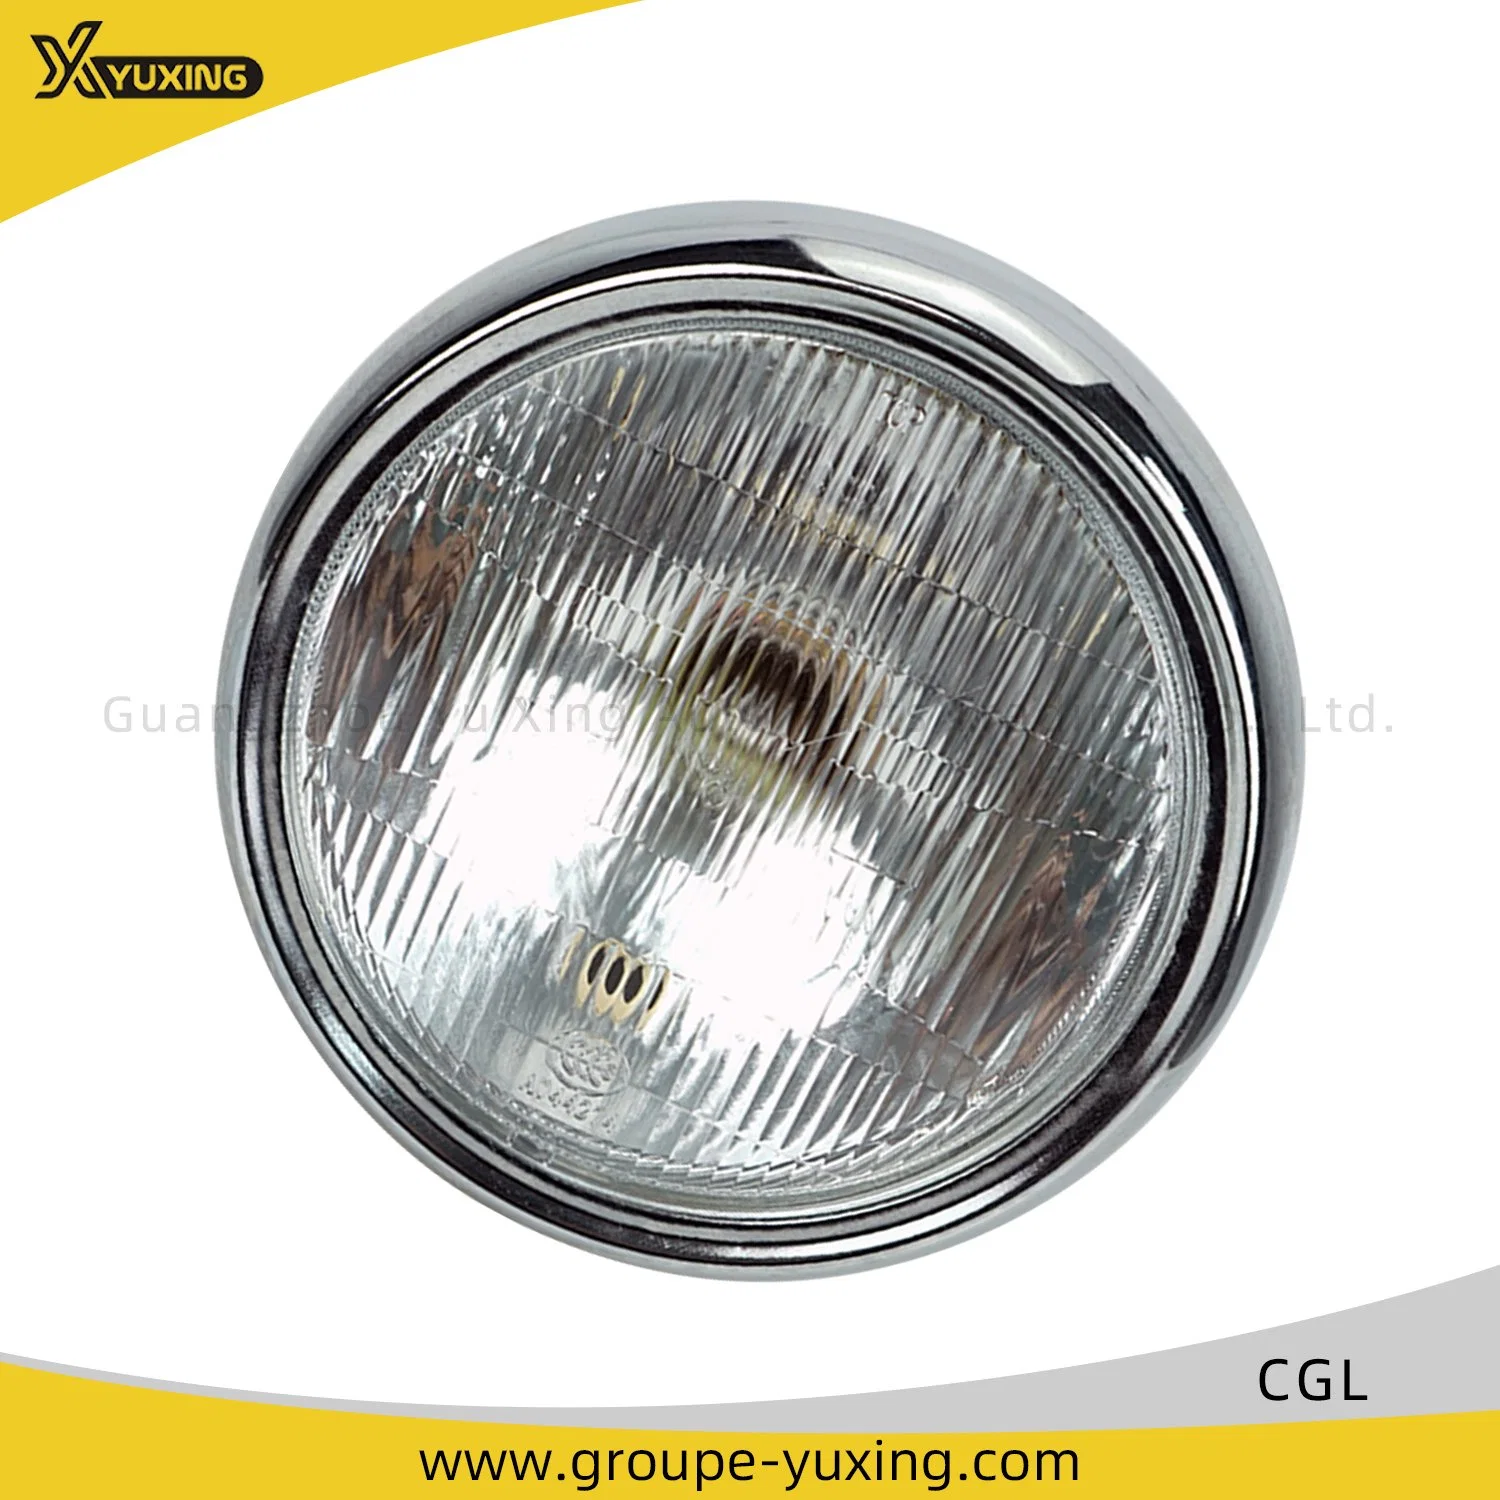 China Wholesale/Supplier Motorcycle Spare Parts Motorbike Head Light